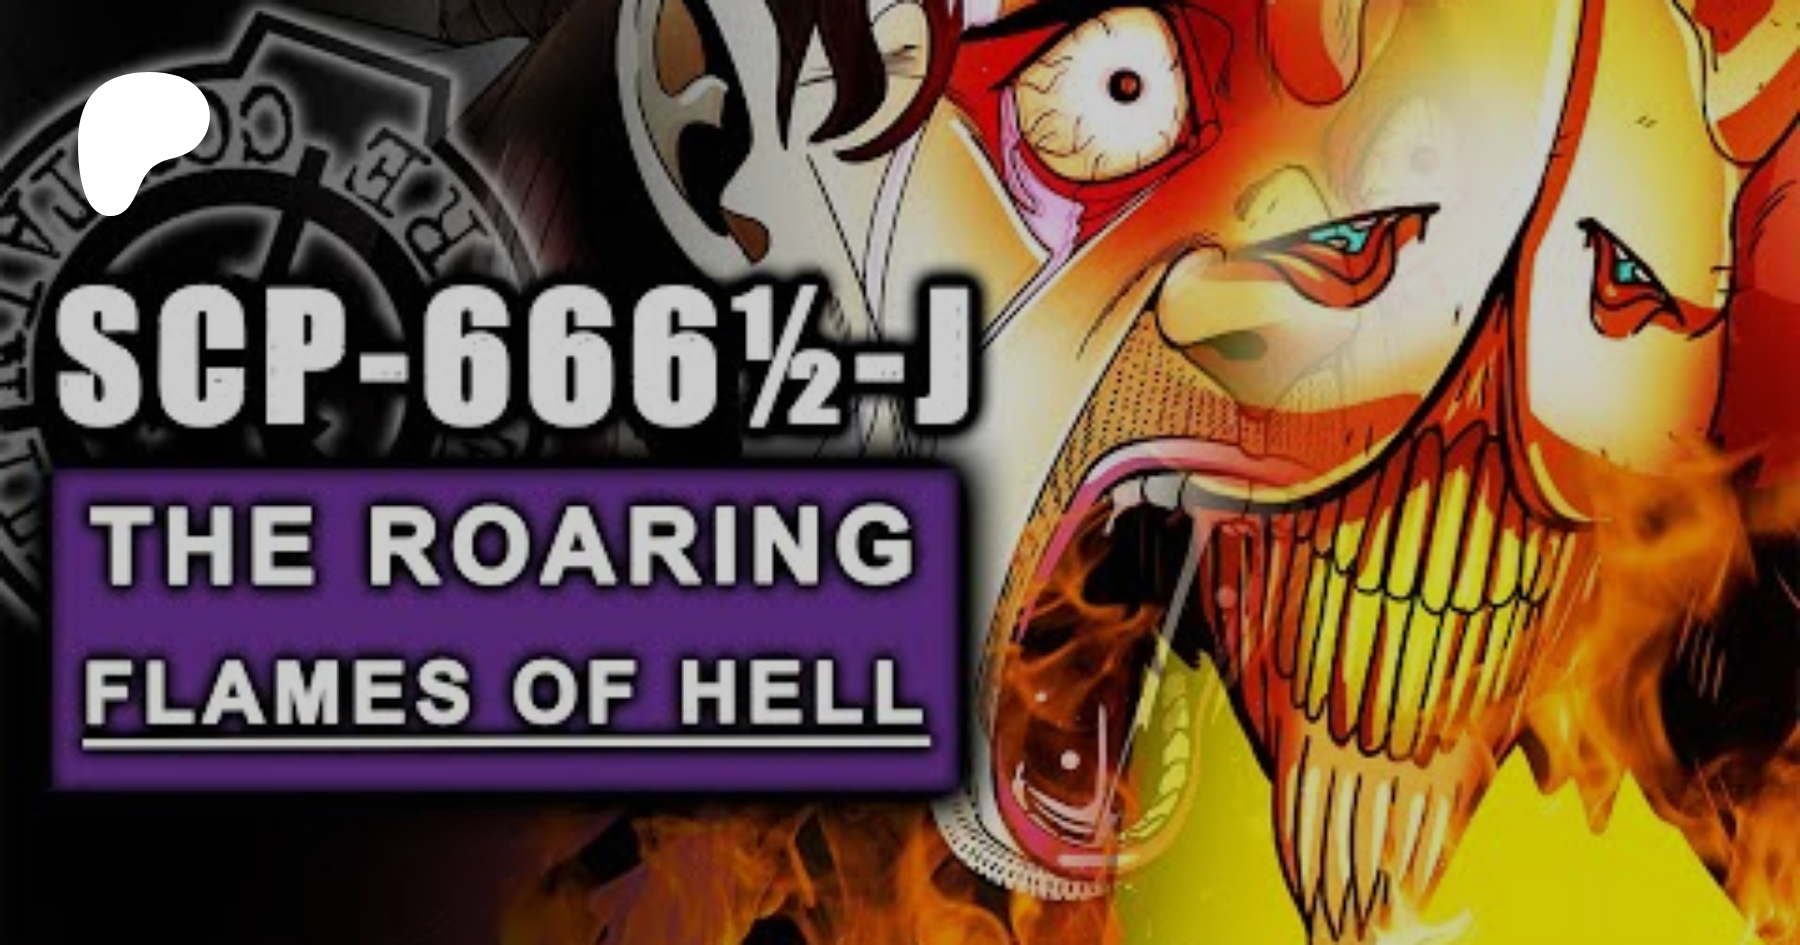 SCP 666,5-J the roaring flames of hell : r/SCP